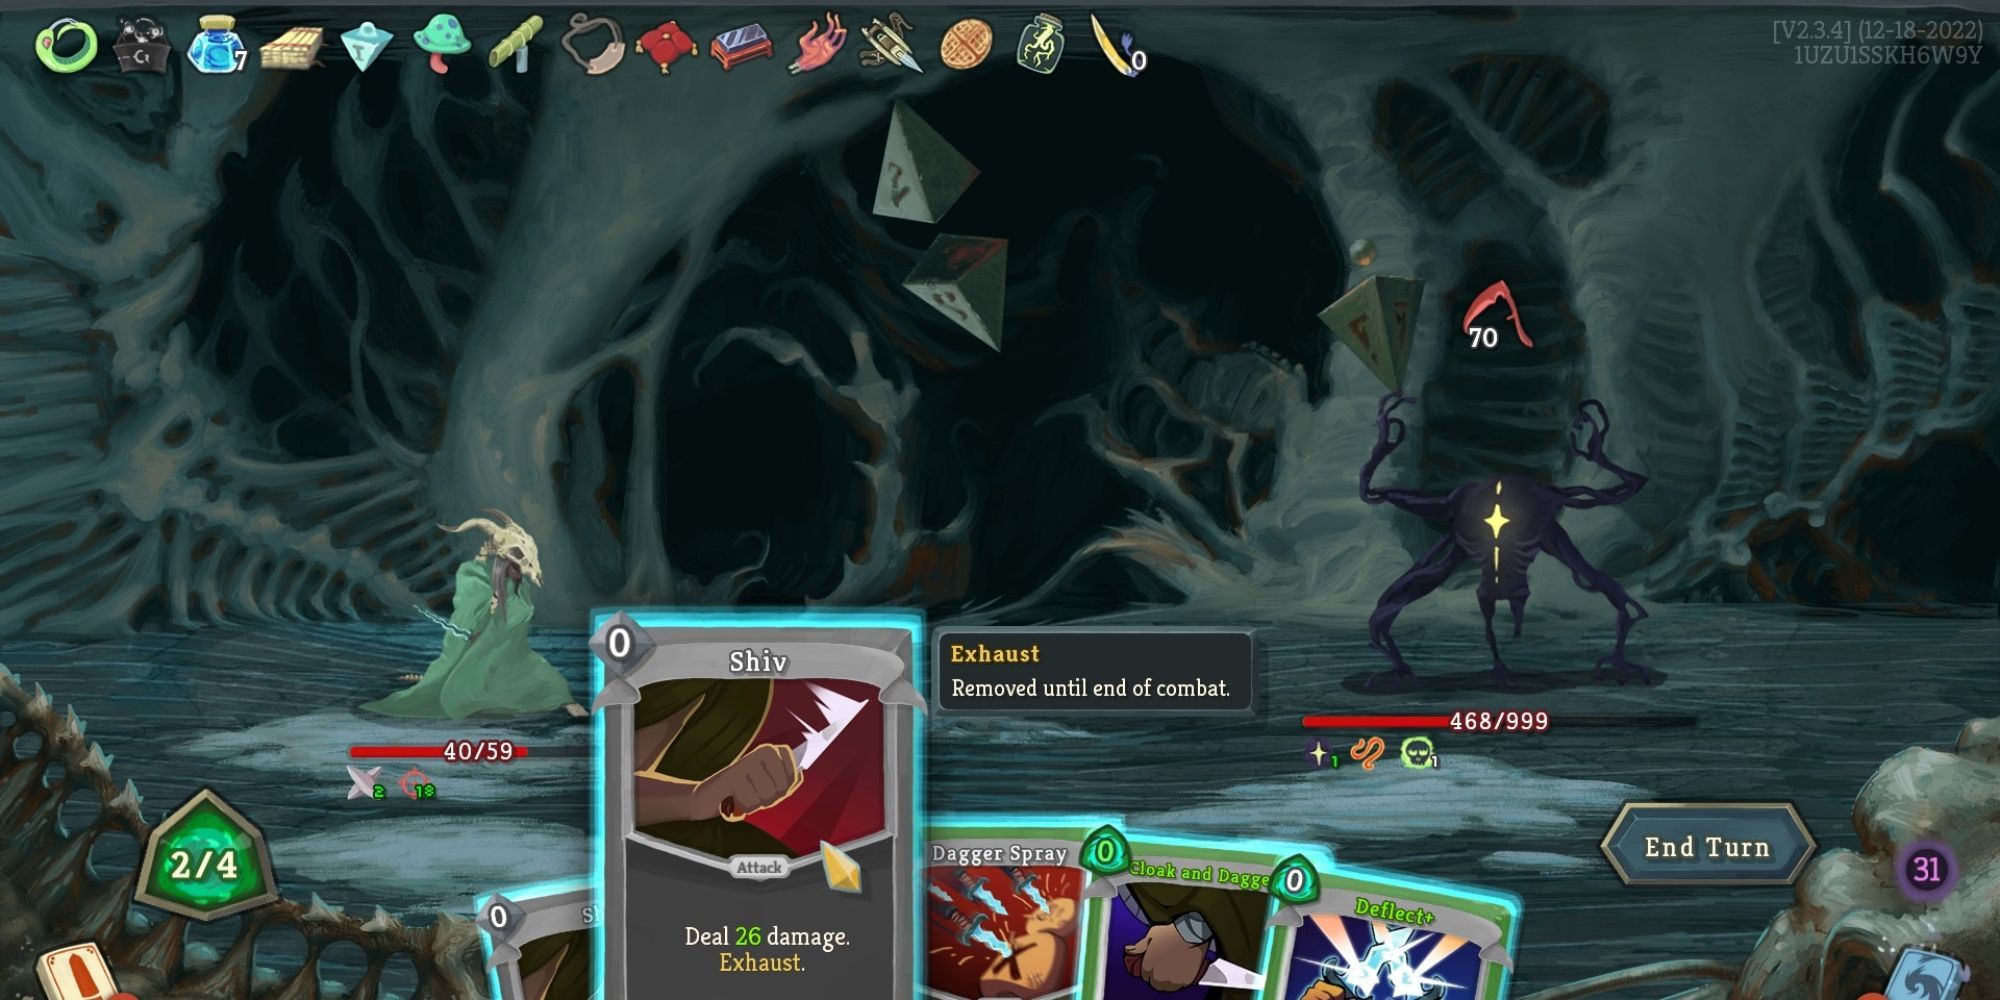 A player plans their next attack through a card UI against a multi-limbed, shadowy creature with glowing yellow accents.